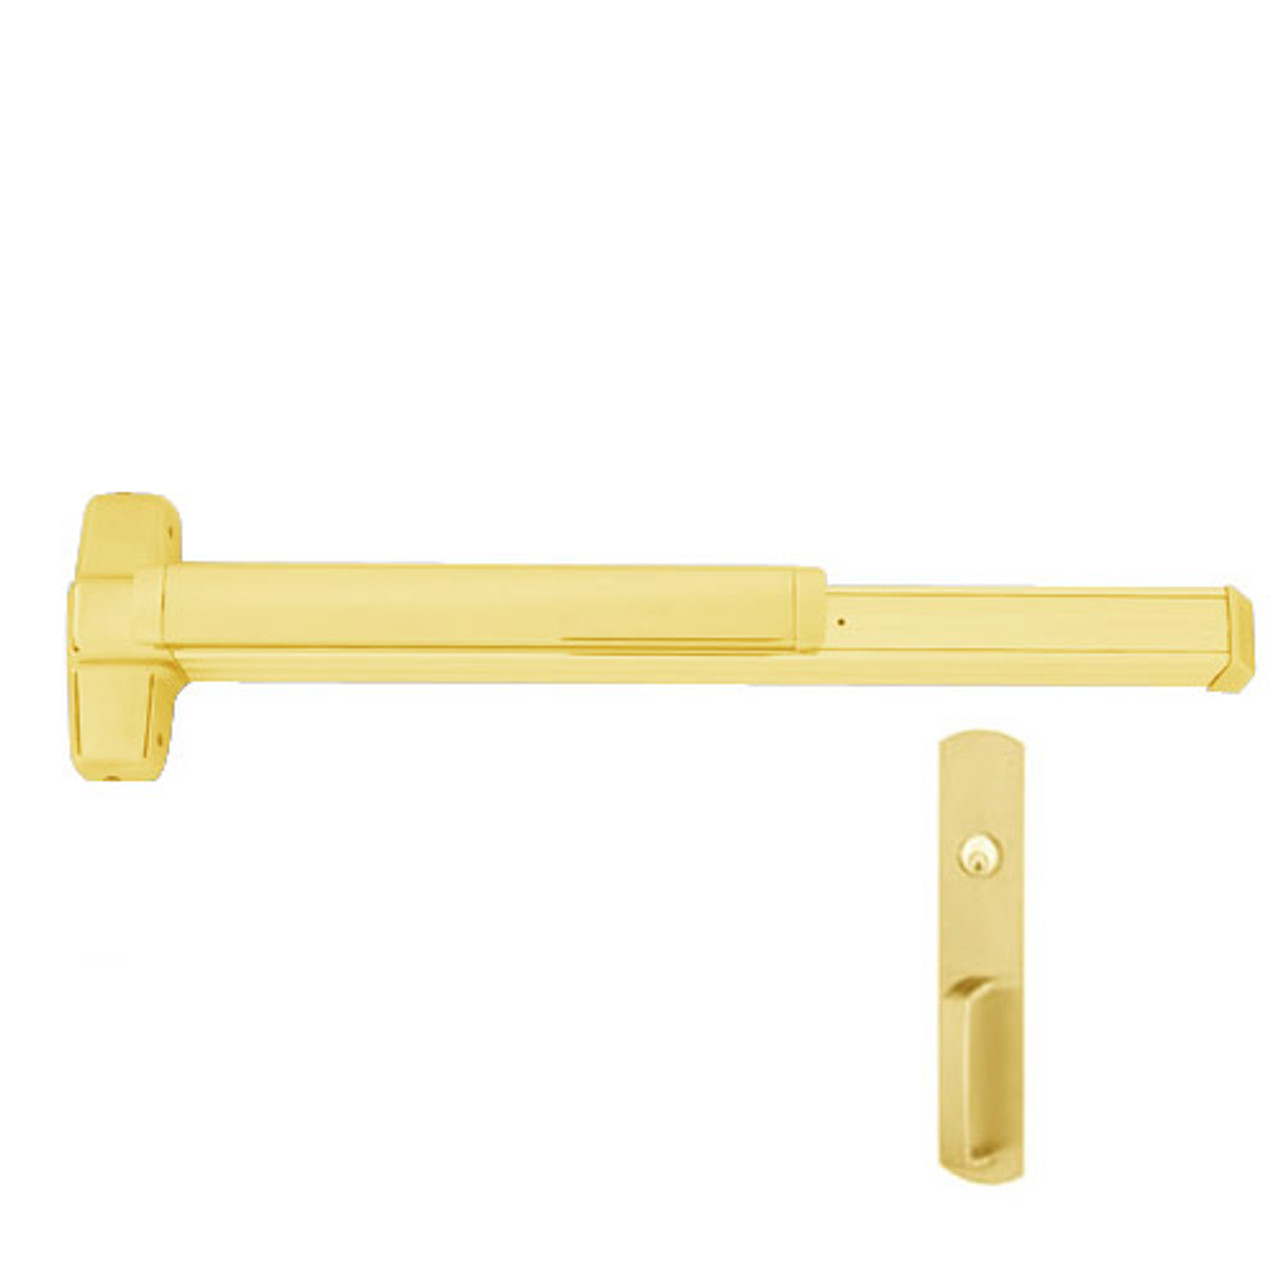 QEL9847WDC-NL-US3-4 Von Duprin Exit Device with Quiet Electric Latch in Bright Brass